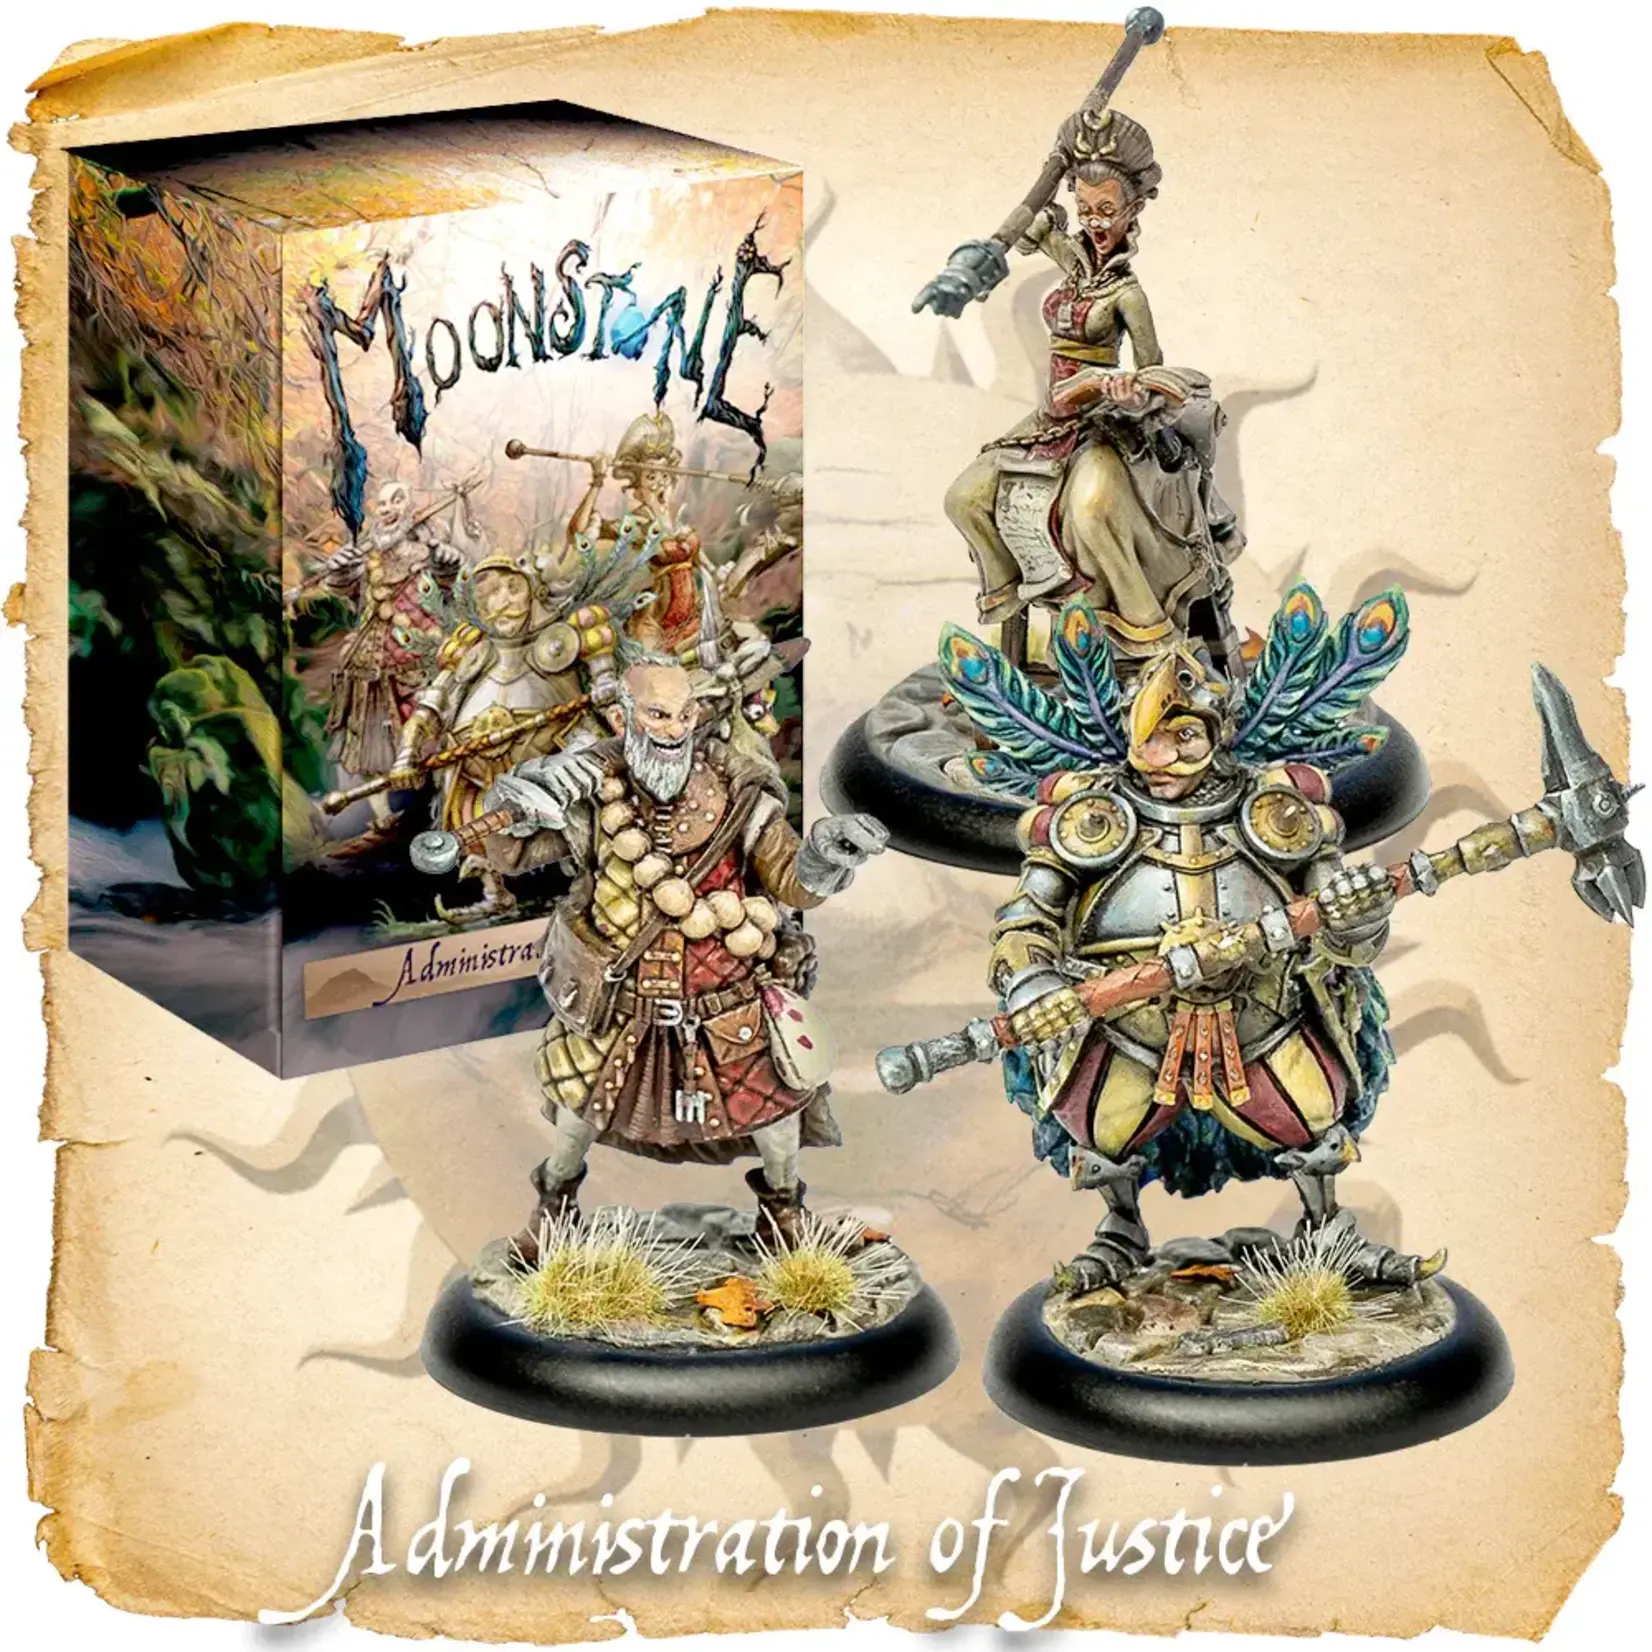 Moonstone Moonstone Administration of Justice